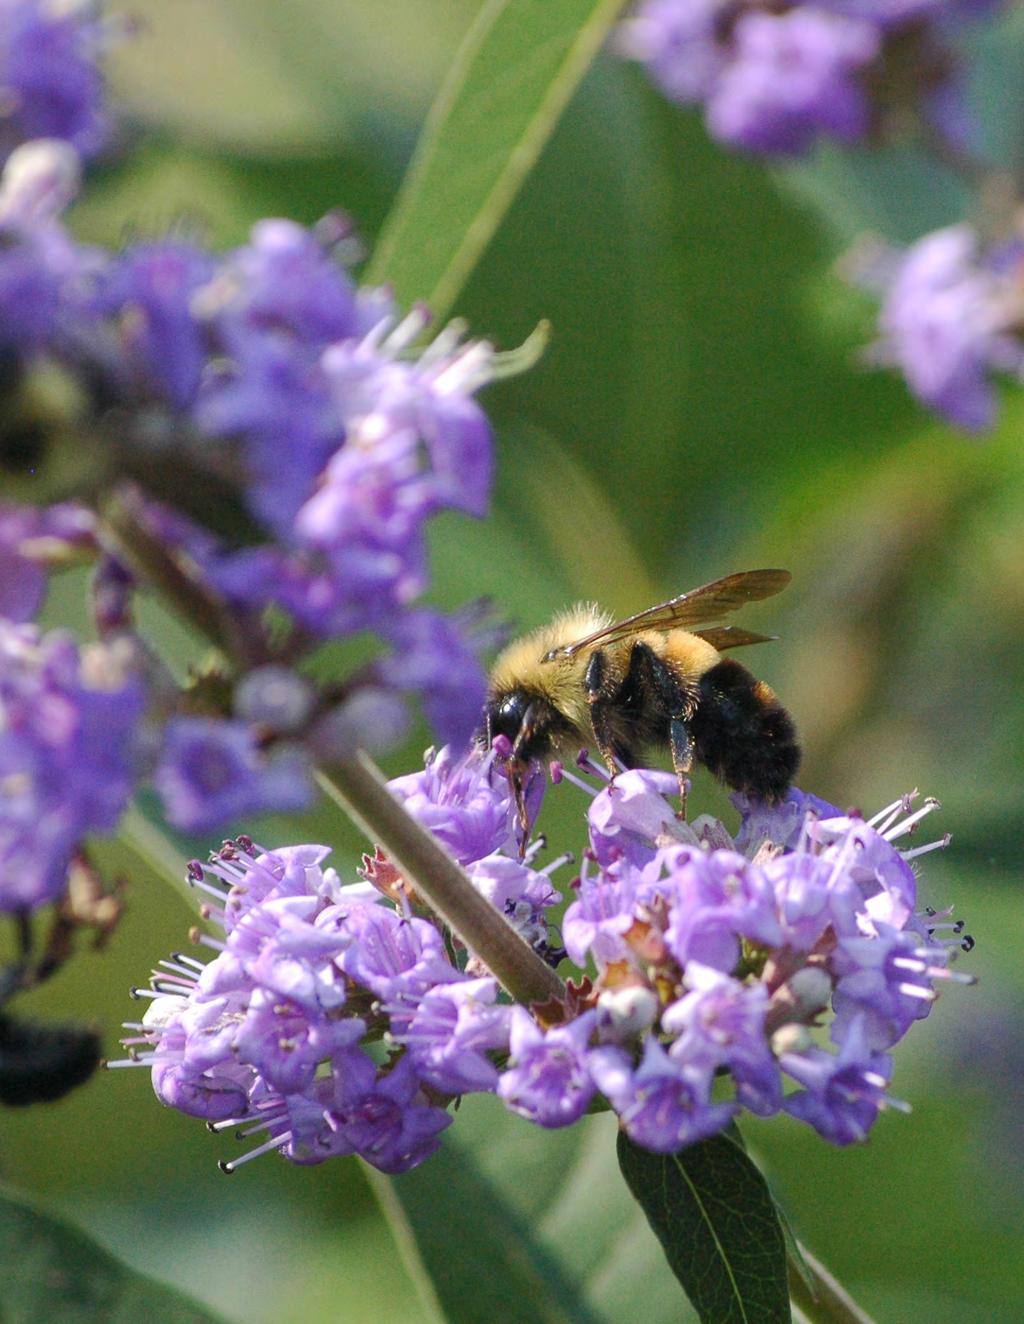 NATIVE POLLINATORS AT RISK INCLUDE: Bees: Rusty-patched Bumble Bee (Endangered) Gypsy Cuckoo Bumble Bee (Endangered) Yellow-banded Bumble Bee (Special Concern)